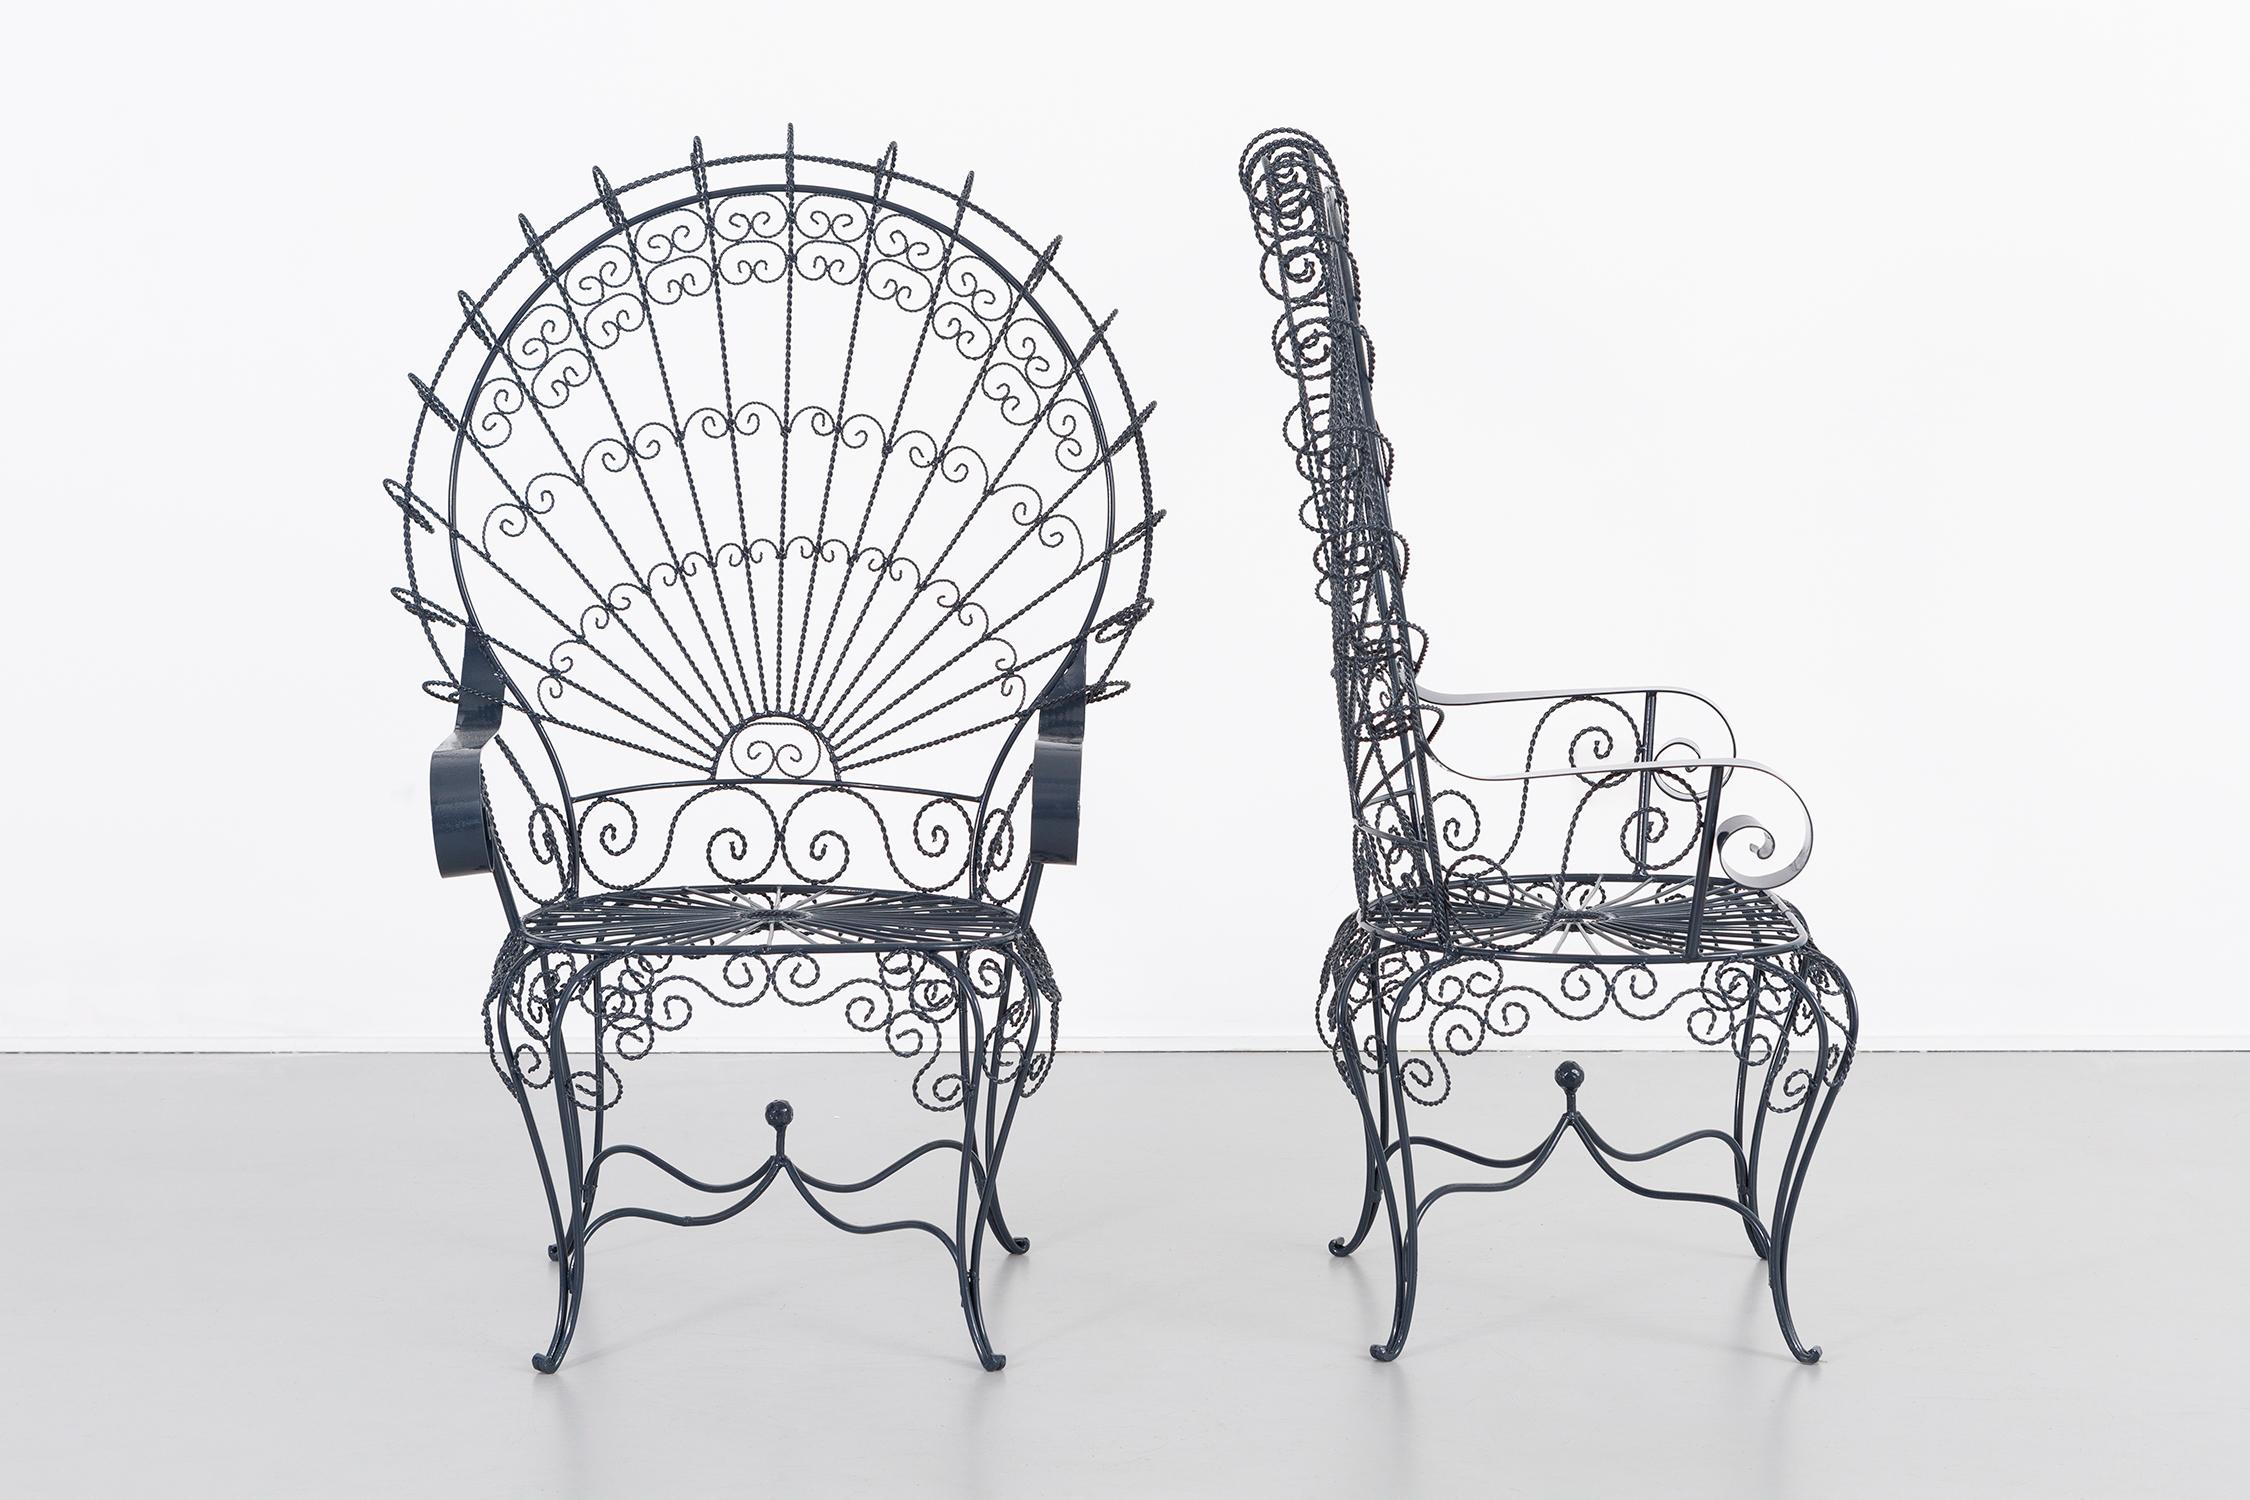 Set of two Peacock chairs.

Designed by John Salterini.

USA, circa 1930s.

Wrought iron.

Freshly powder coated.

Measures: 48 ?” H x 32 9/16” W x 23 ?” D x seat 16 5/8” H.

Color sample of powder coating available upon request.